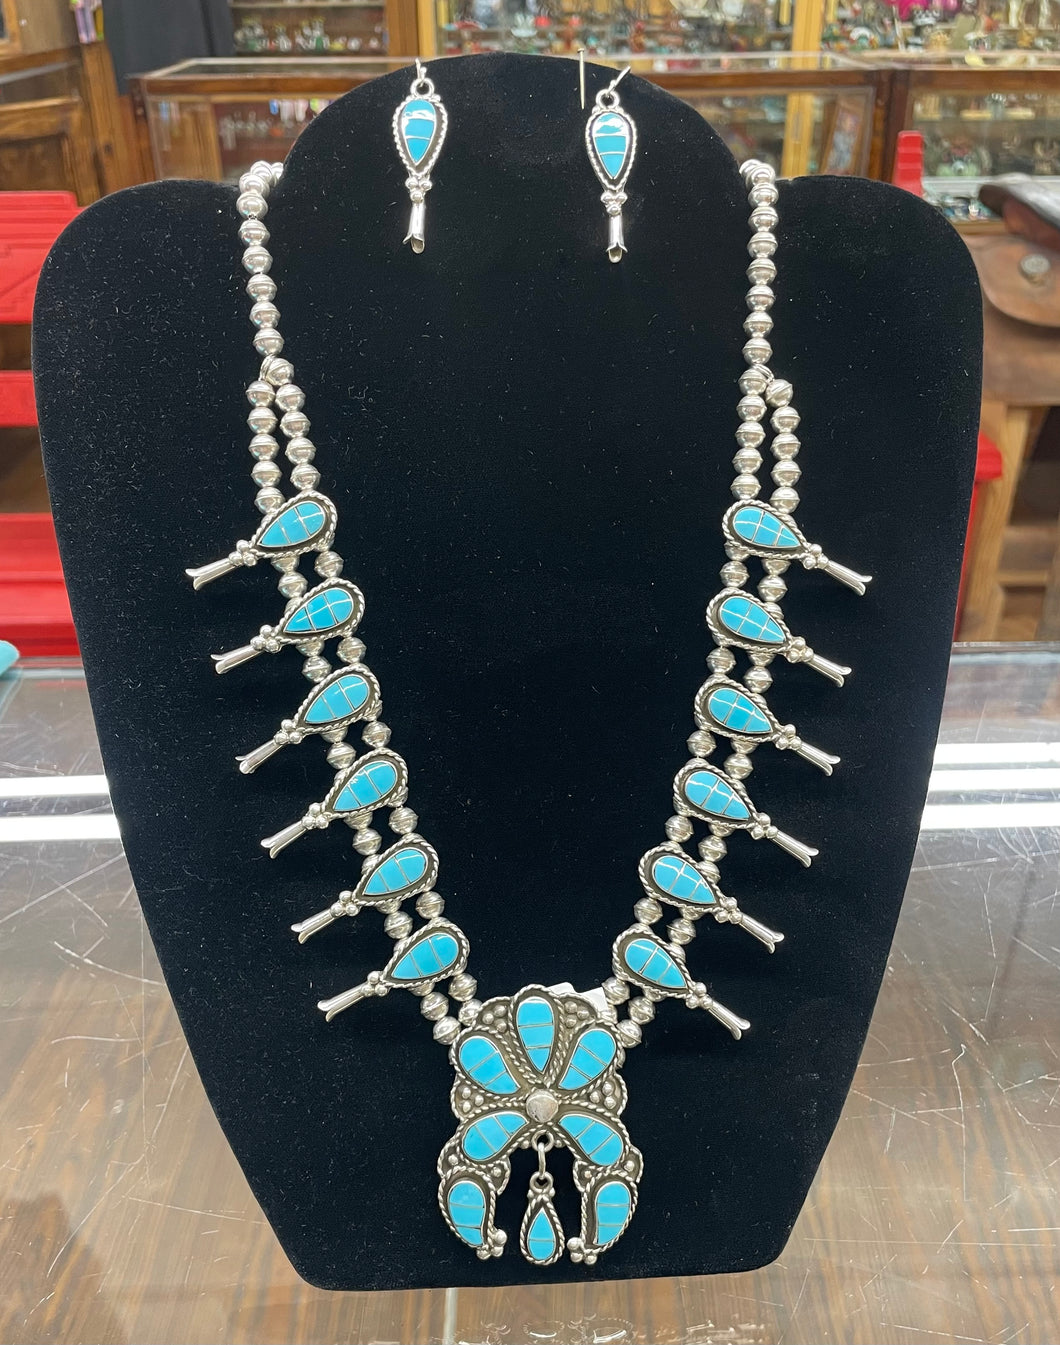 Zuni Inlay Turquoise Squash Blossom Necklace with Matching Earrings